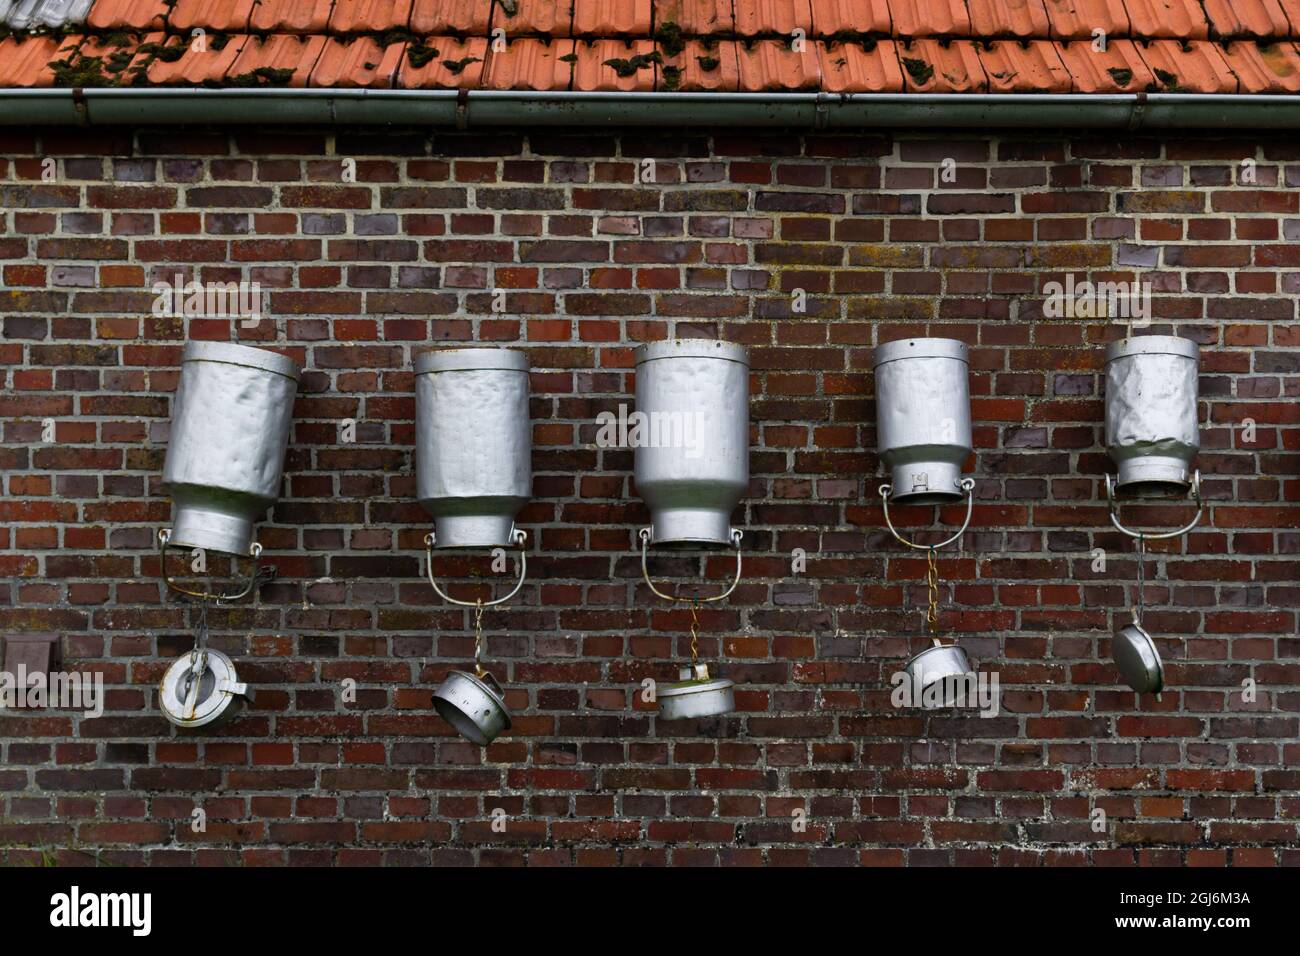 Upside-down of milk cans hanging against a brick wall Stock Photo